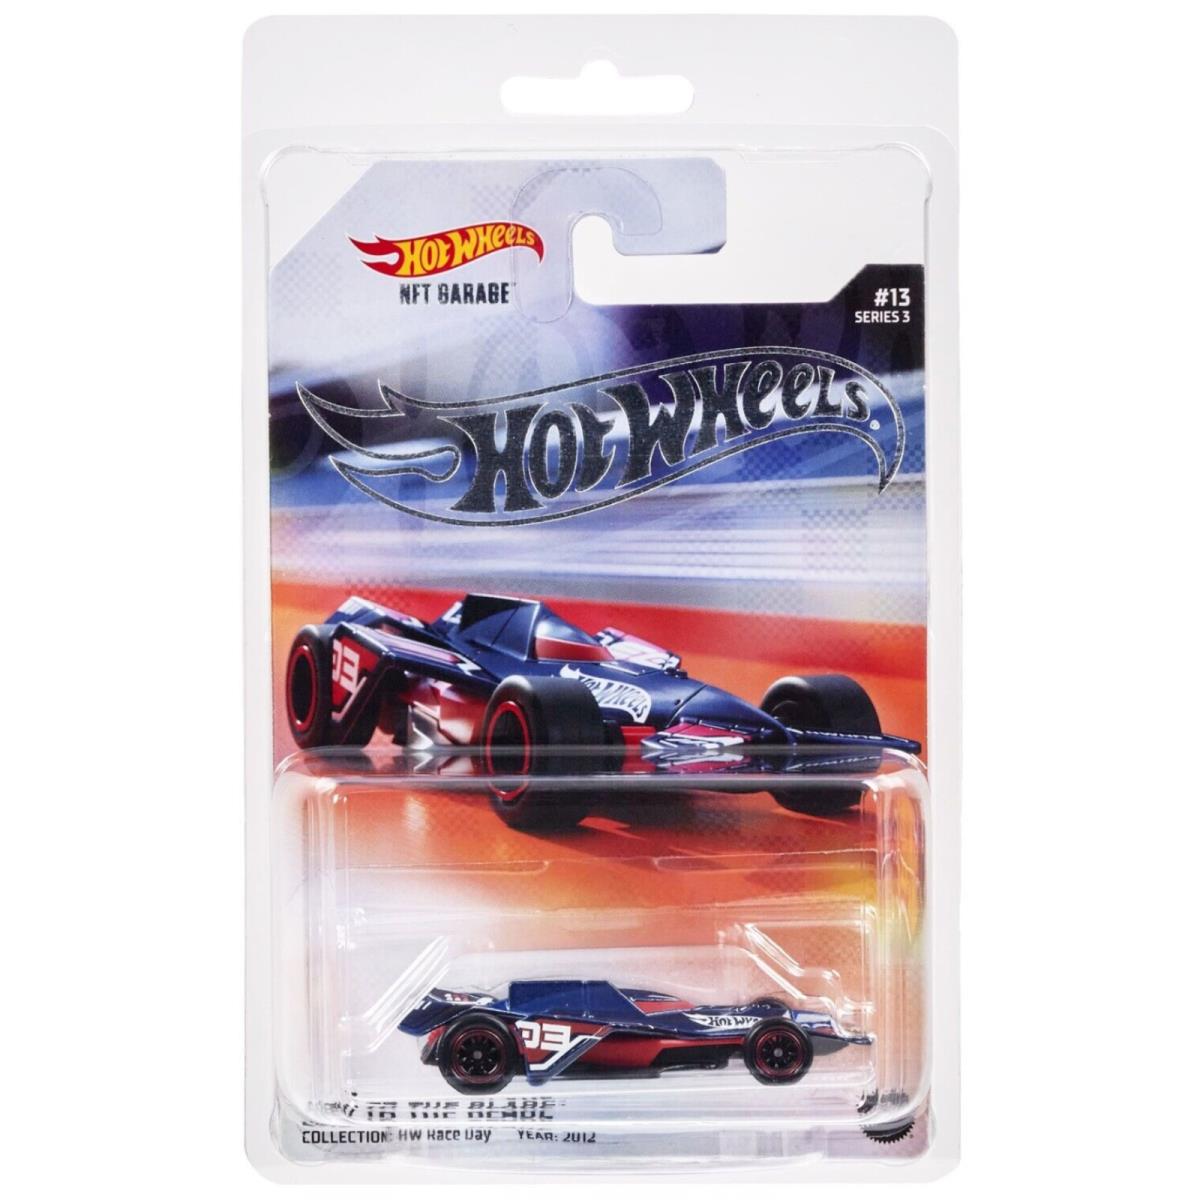 Hot Wheels Bad To The Blade Nftgarage Series 3 Only 1682 Exist. Rarer Than Sth